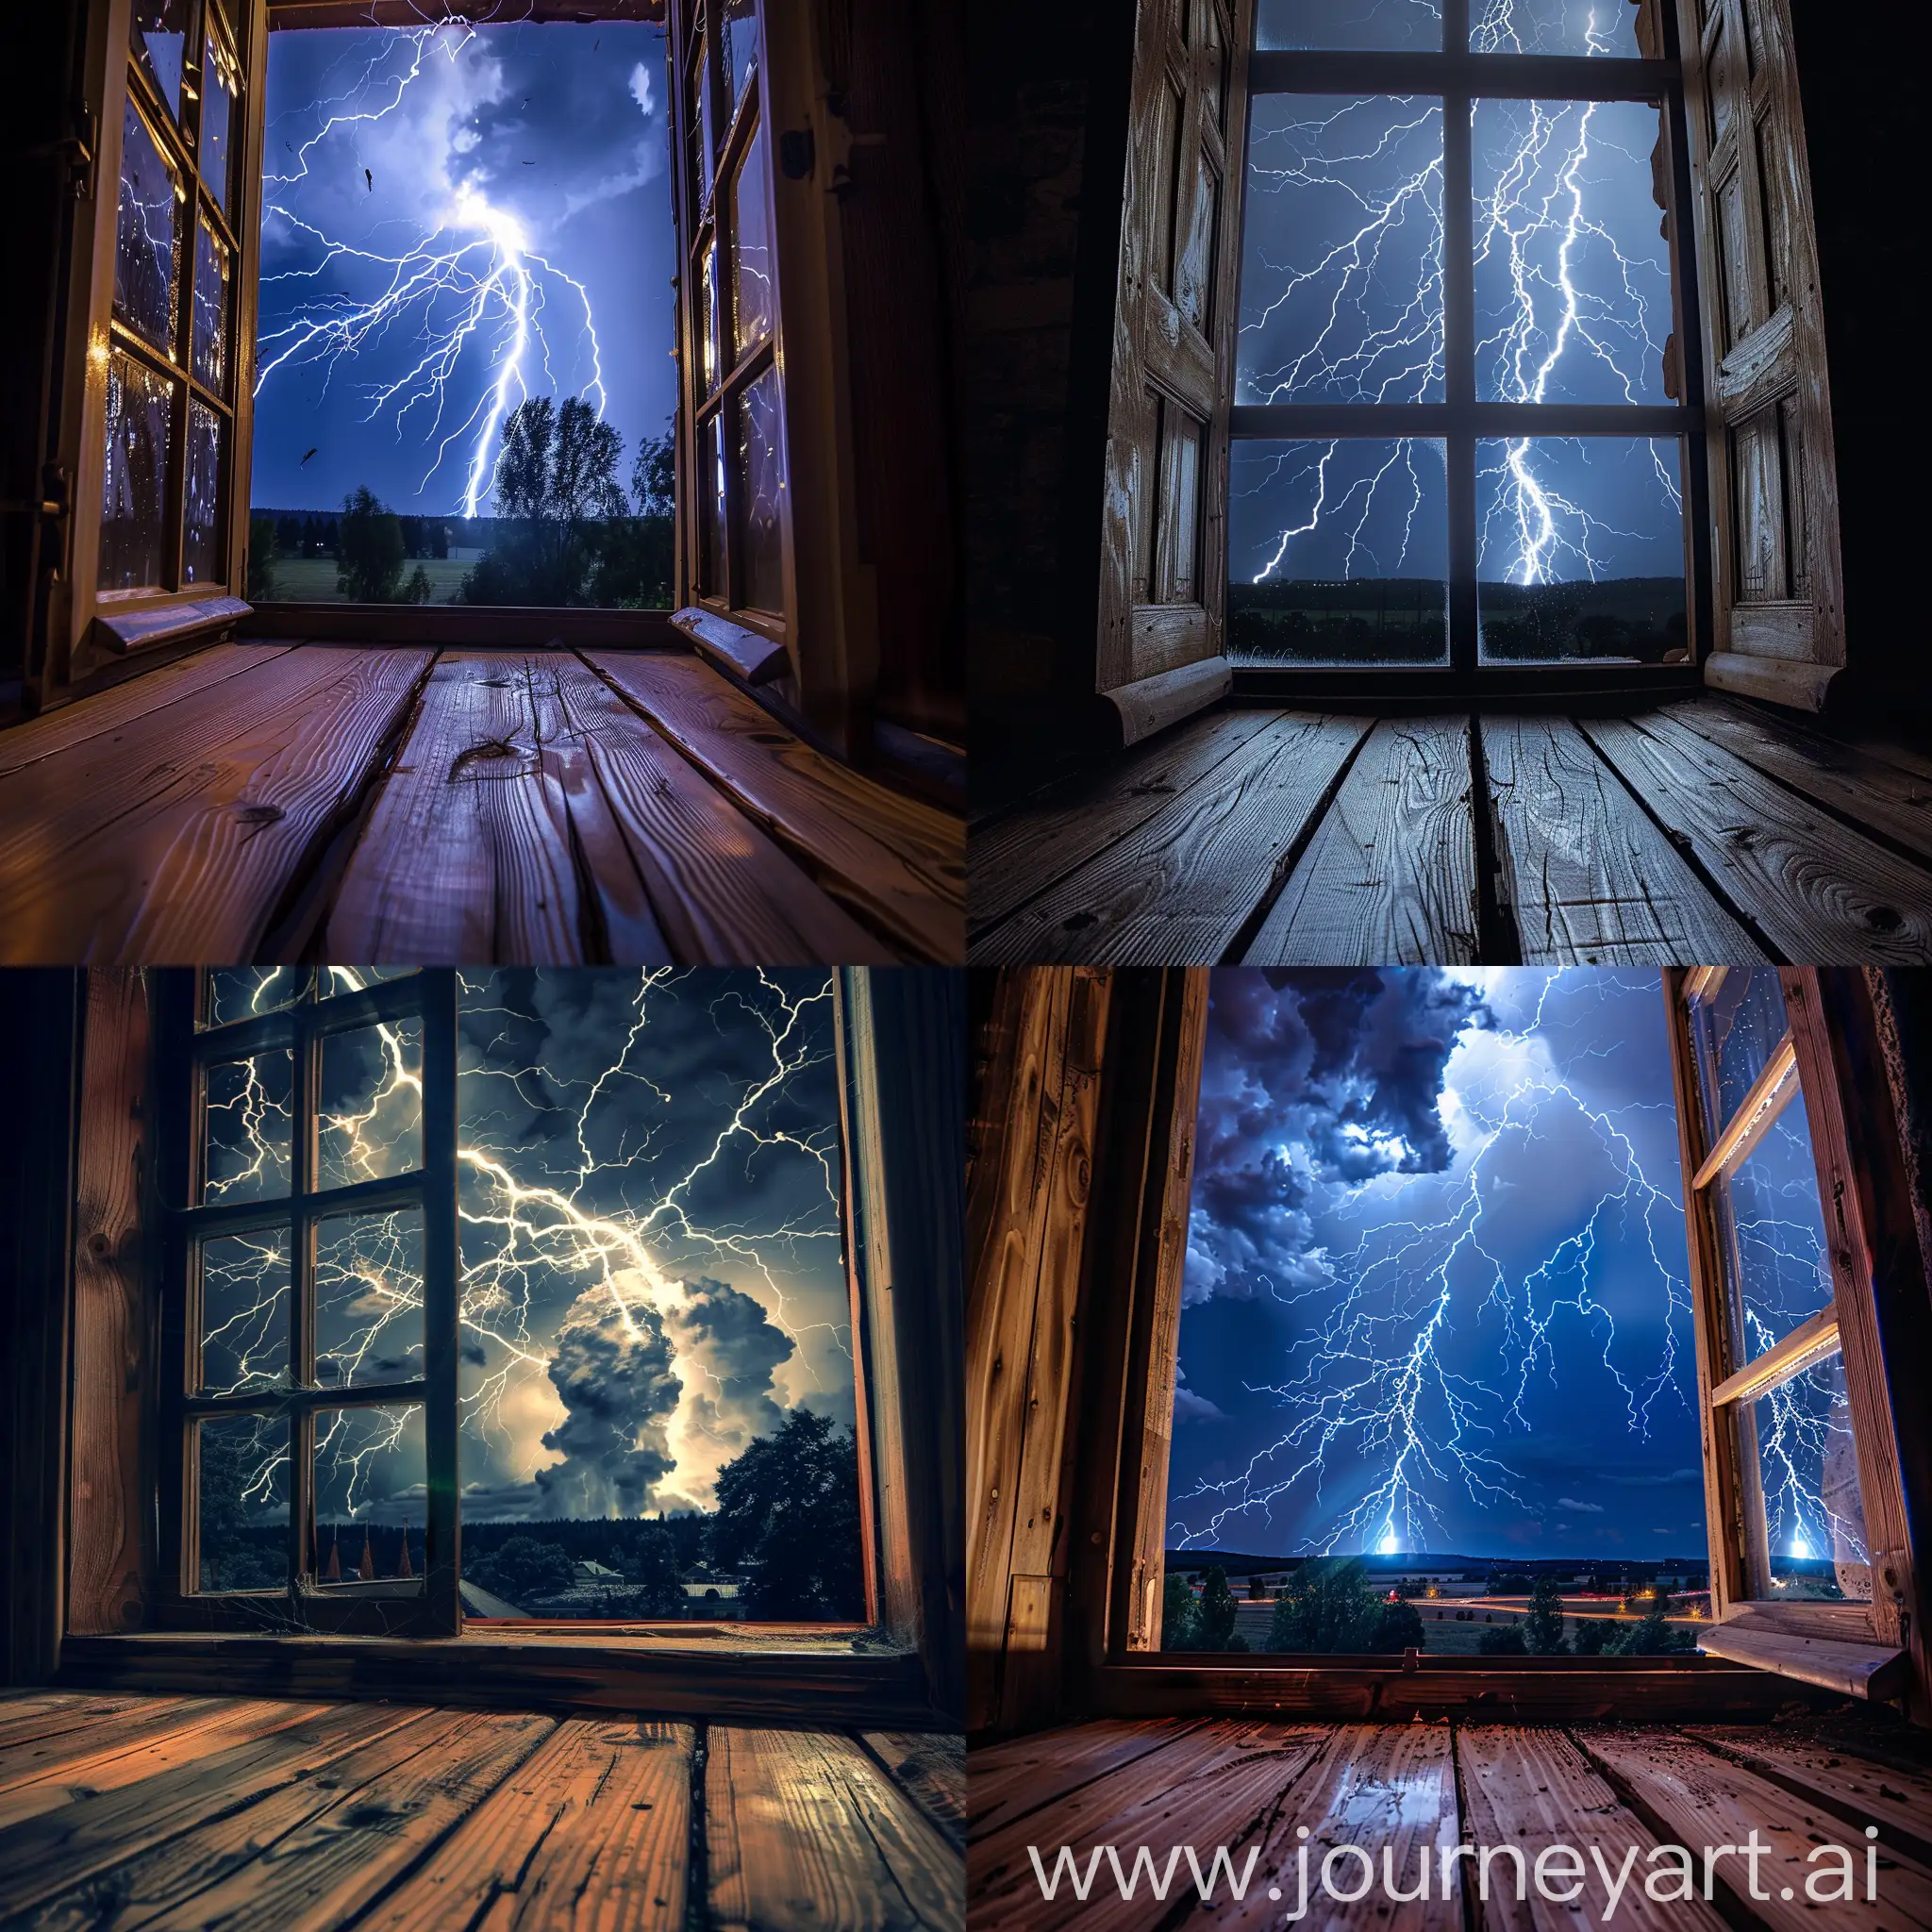 pov from inside an old wooden floor room looking out a Window during night and seeing a huge lightning impact